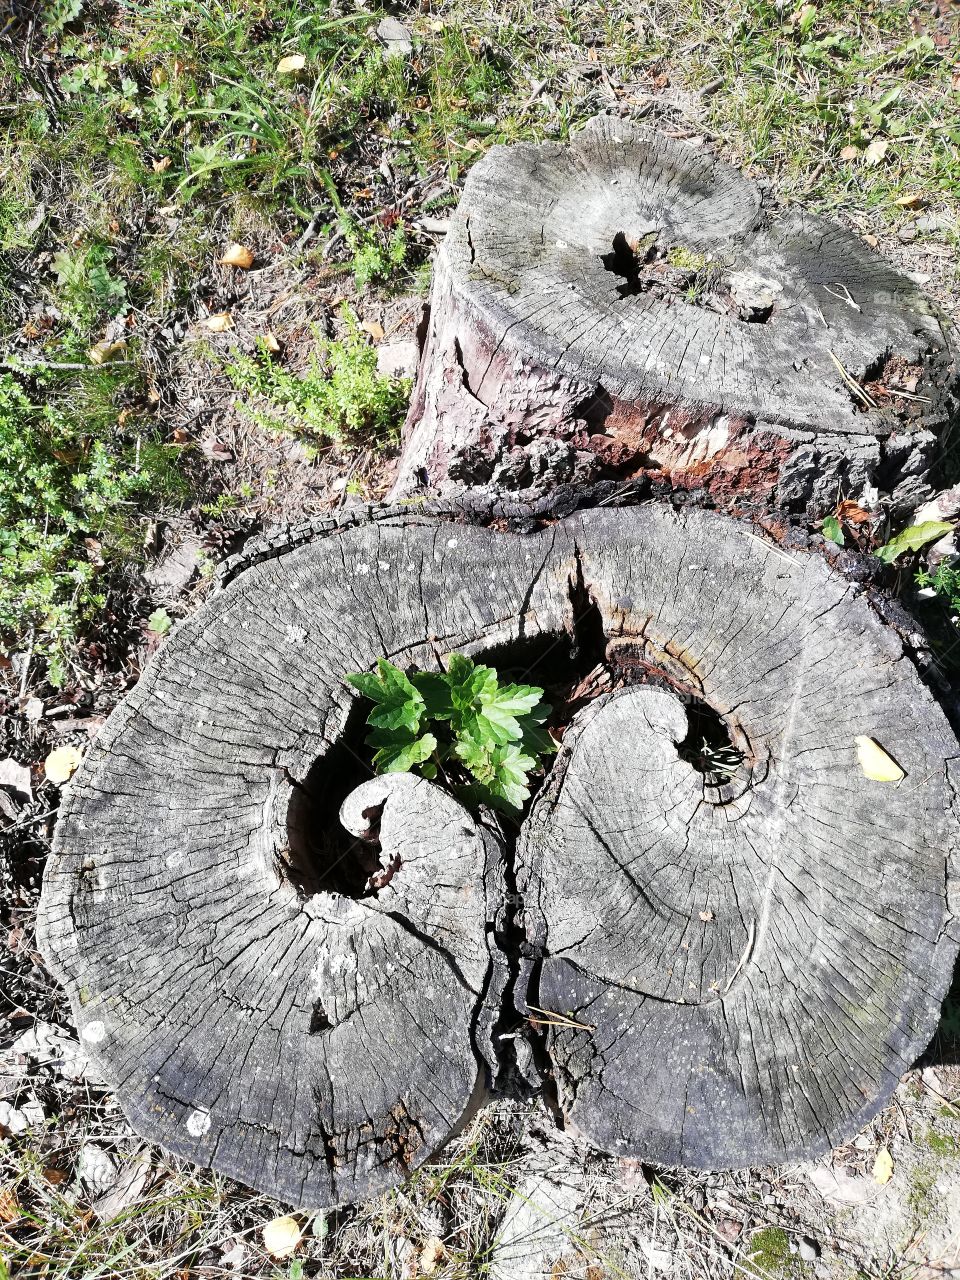 The grains and annual rings are seen on the two rotted stumps. The rotten wood became holey. The dried leaves and needles are in the hole and a green plant is growing there. The grey bark is unfastened, the surface patterned.